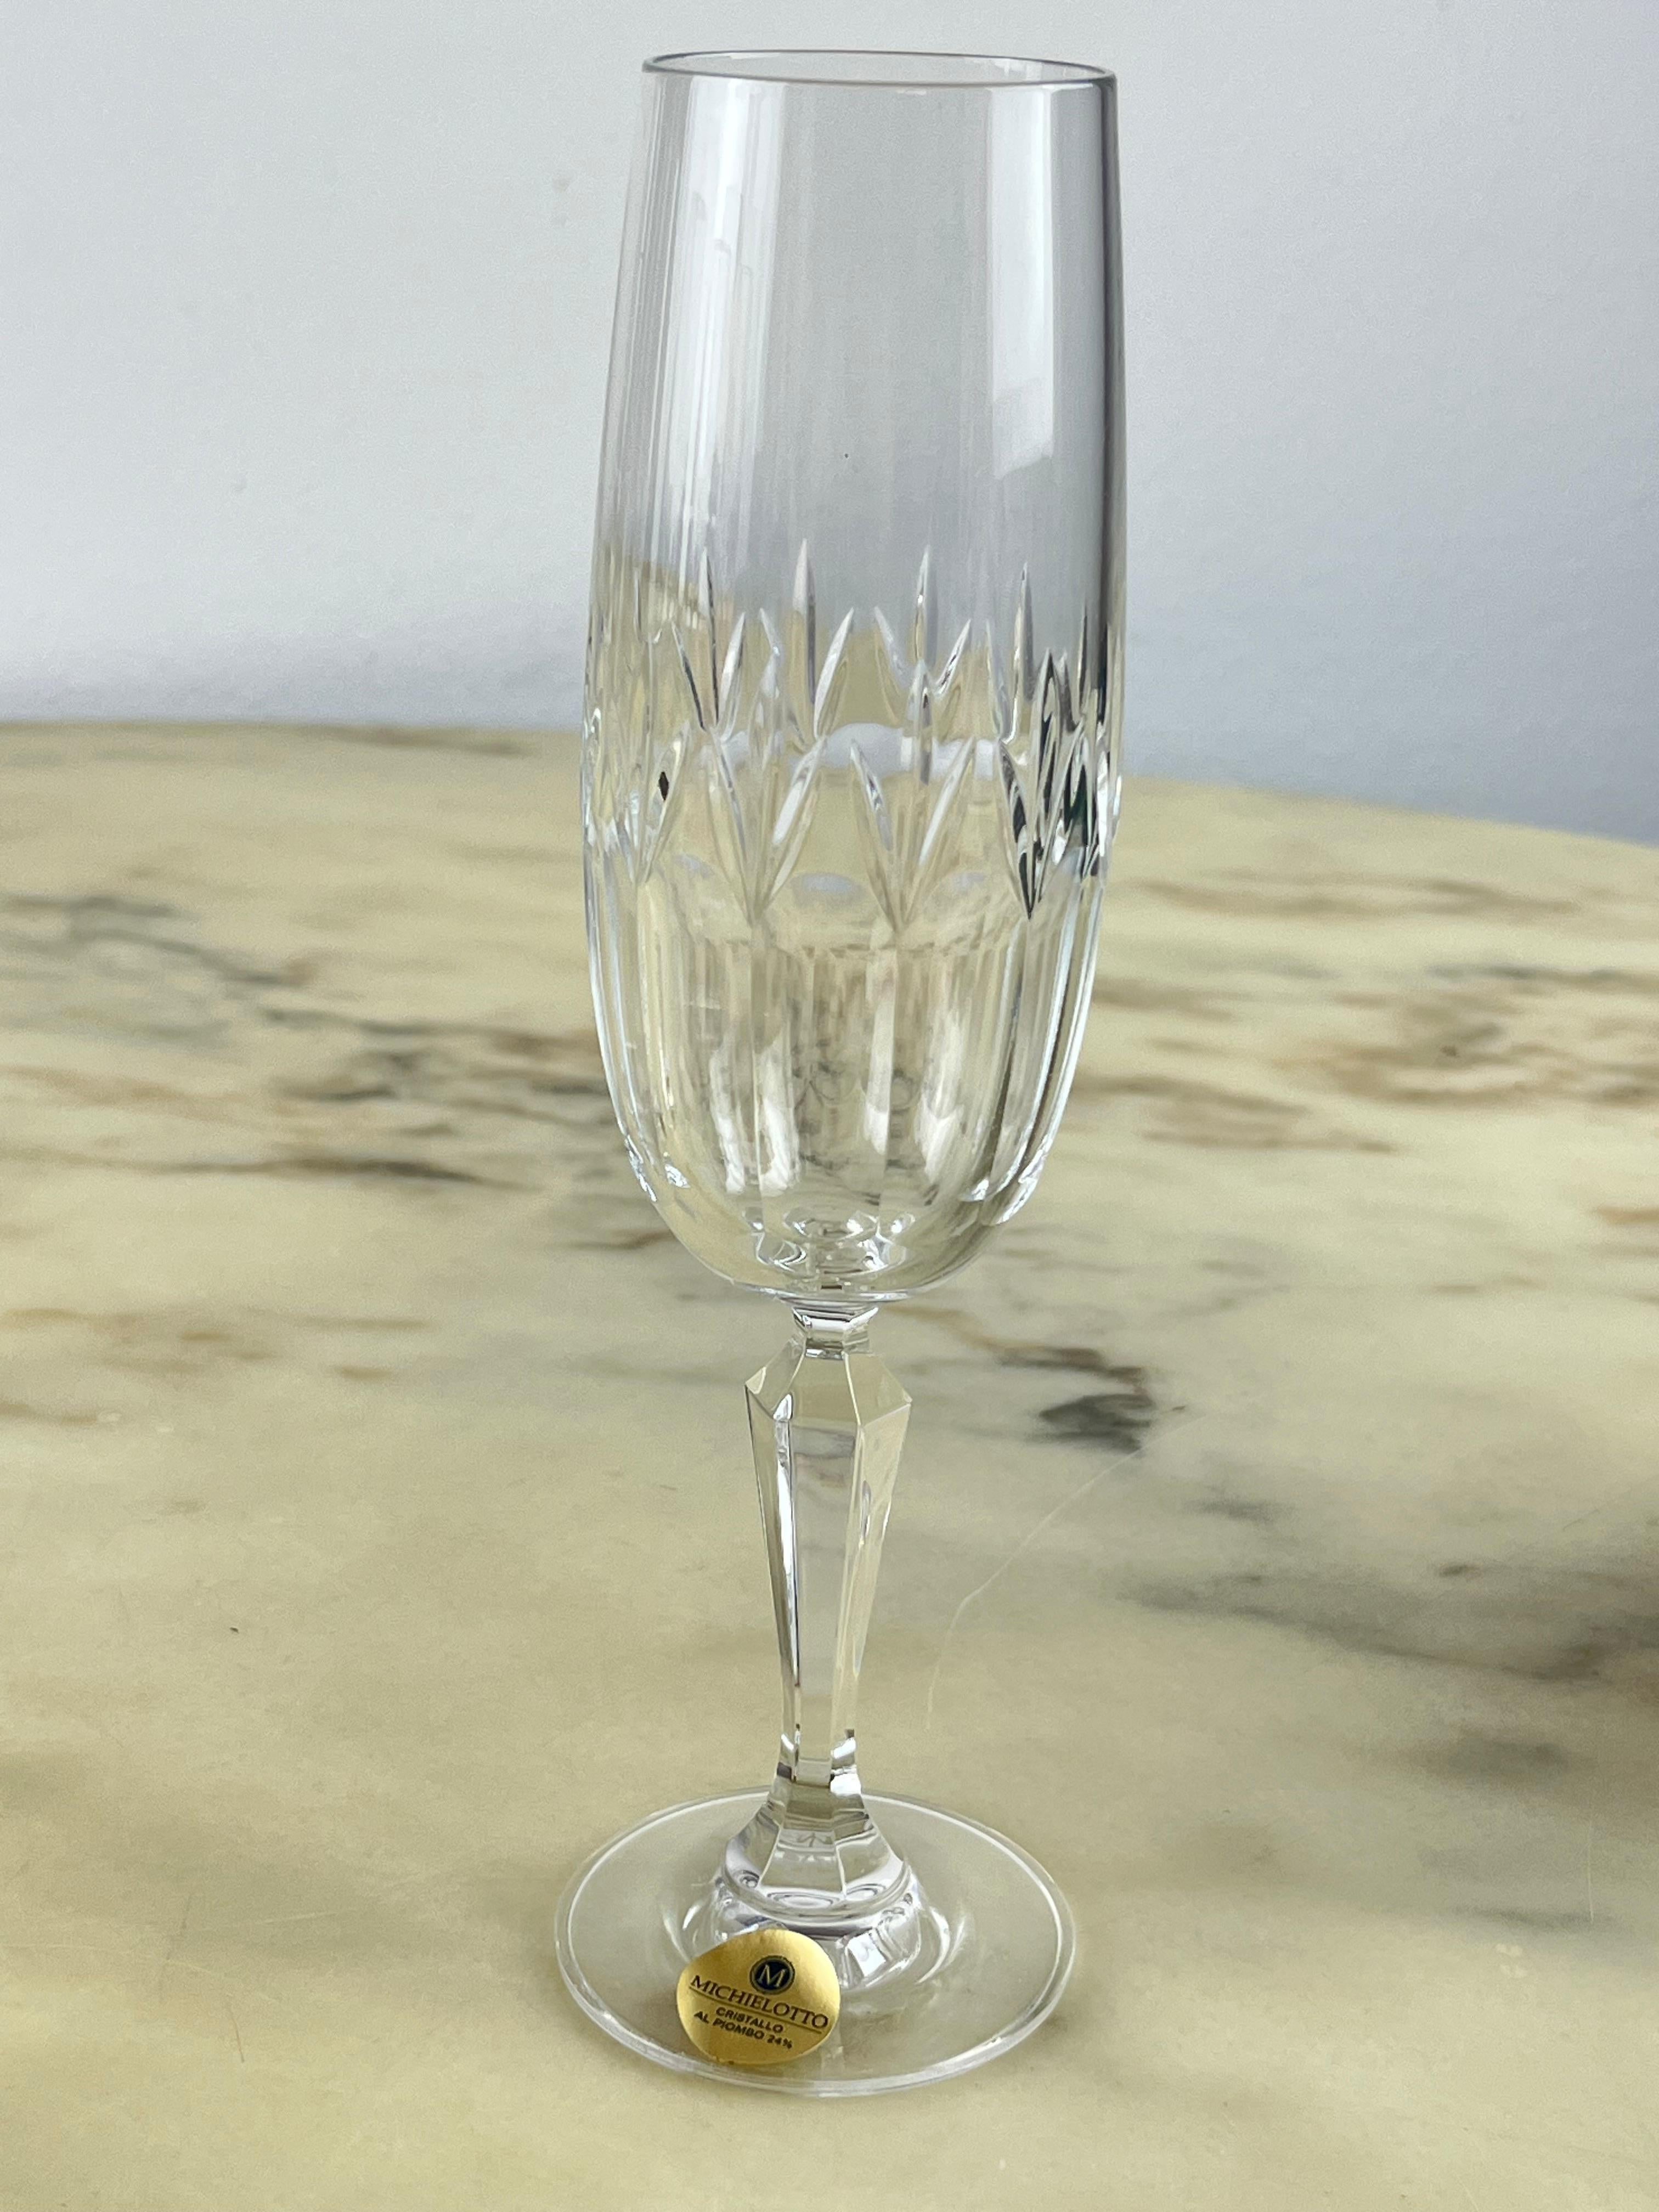 Set of 6 Bohemia Crystal Champagne Glasses, Czech Republic, 1980s, never used In Excellent Condition For Sale In Palermo, IT